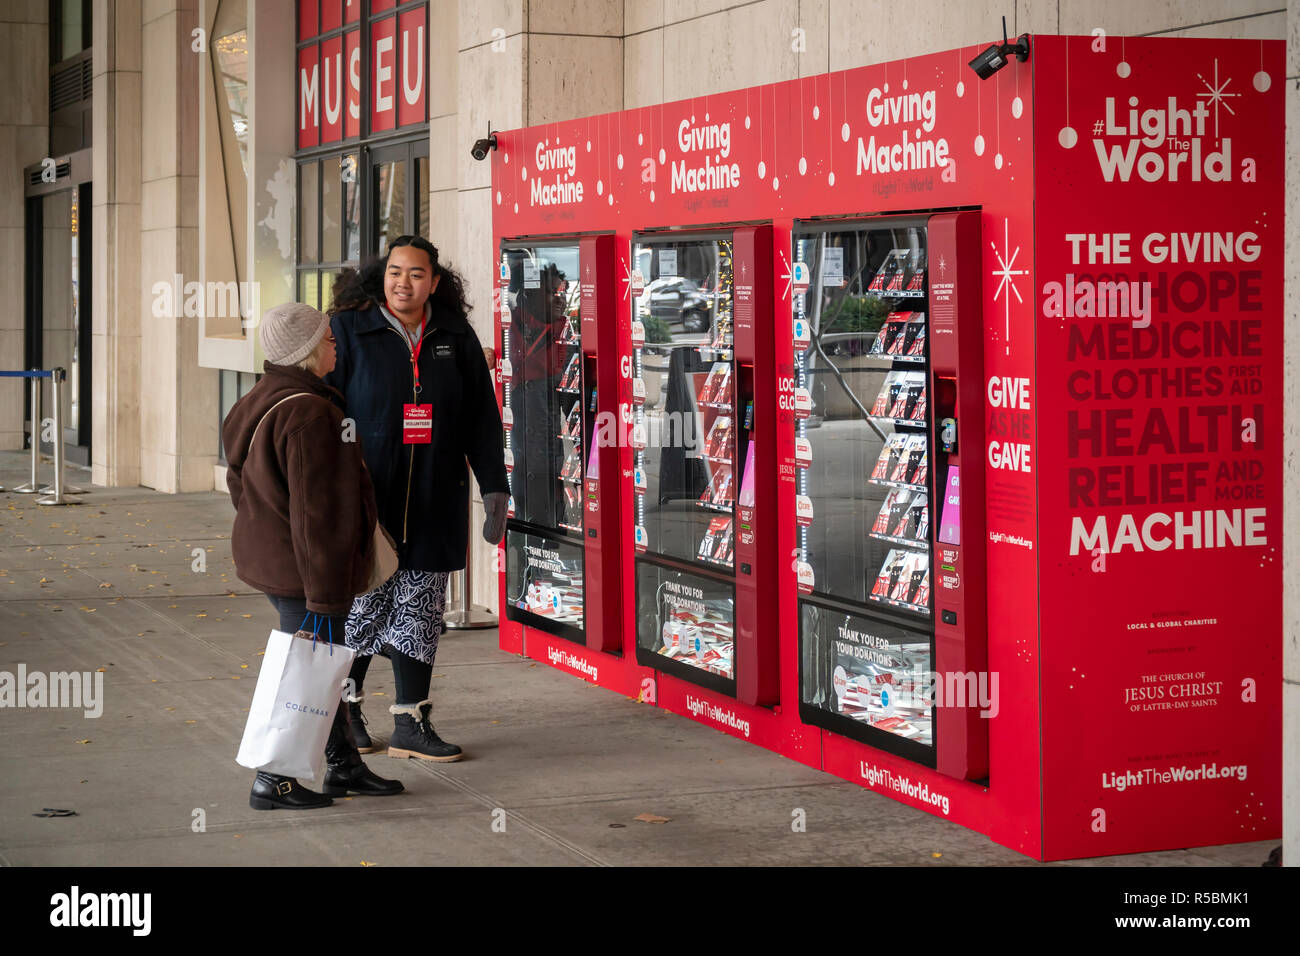 Just in time for #givingtuesday, volunteers explain the “Giving Machines' outside the LDS Church in New York on Giving Tuesday, November 27, 2018. The vending machines created by The Church of Jesus Christ of Latter-day Saints enable participants to purchase items, from socks to a goat, that will be distributed to aid organizations. The LDS covers the machines and any associated administrative costs so 100% of the donations goes to the partner charities both local and international. The machines will be around until the end of December. (© Richard B. Levine) Stock Photo